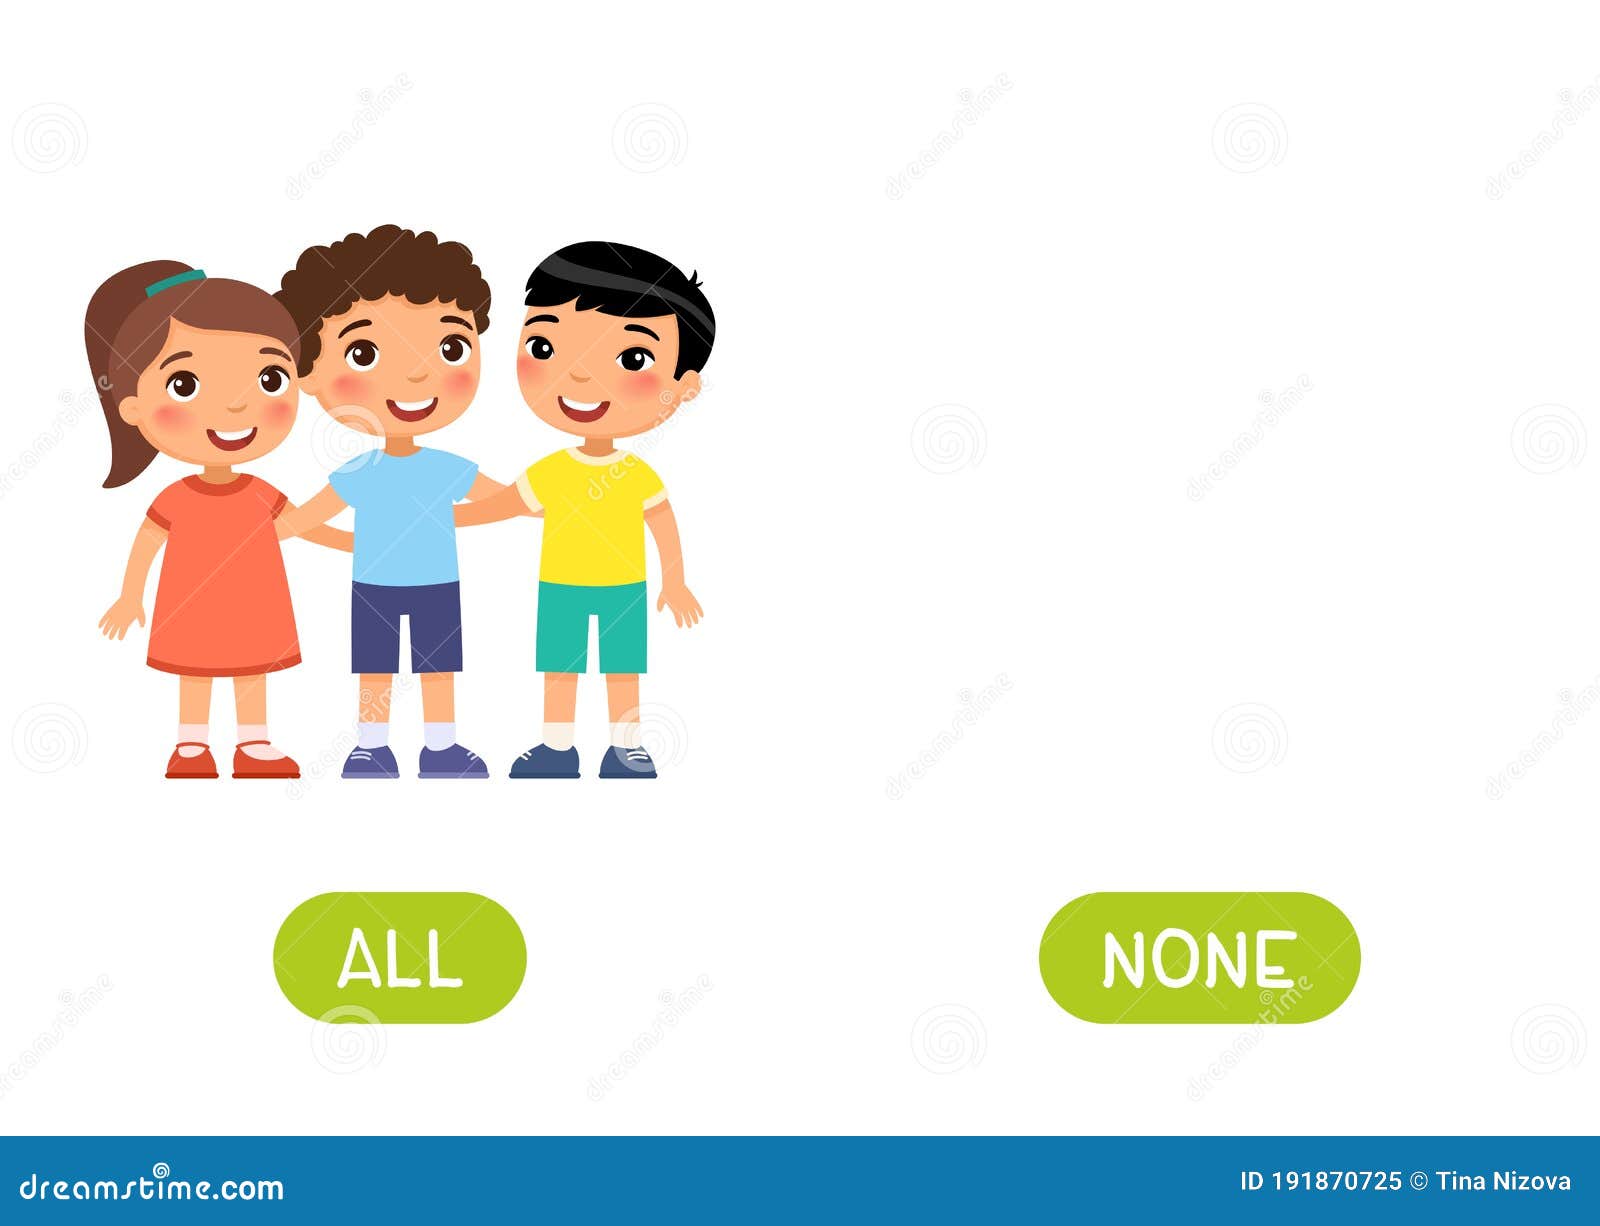 all and none antonyms word card  template. flashcard for english language learning.